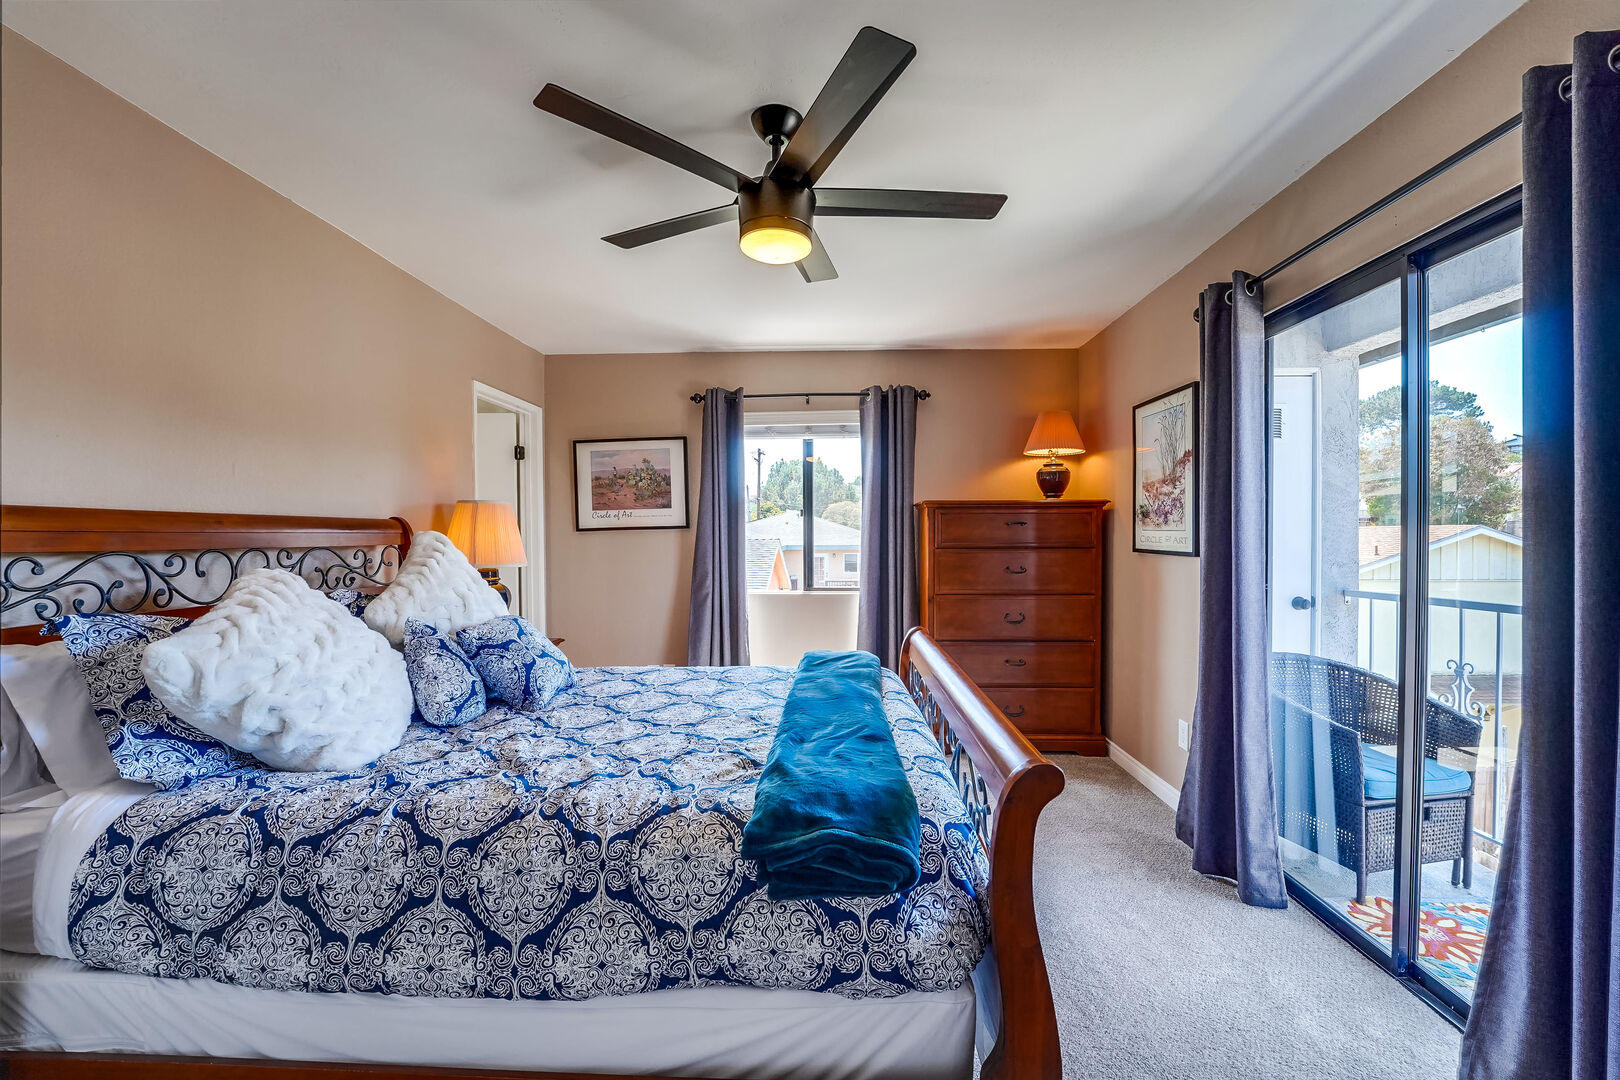 Upstairs master bedroom with queen size bed, in-suite full bathroom, ample dresser and closet space, remote-controlled ceiling fan and light. Small balcony with sometimes strong, refreshing coastal breeze